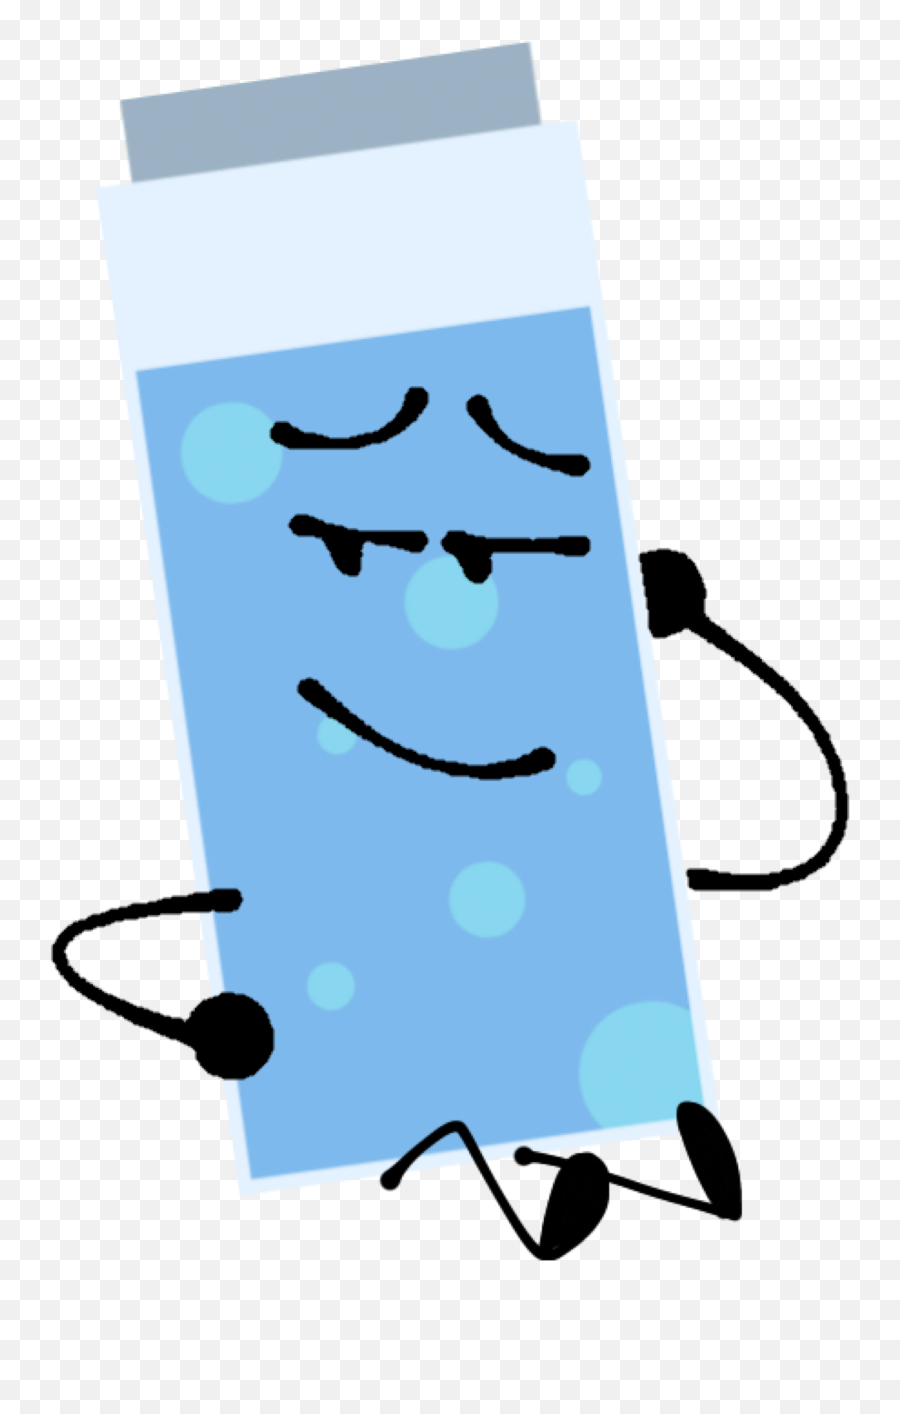 The Daily Object Show Wiki - Daily Object Show Water Bottle Emoji,Water Emoticon